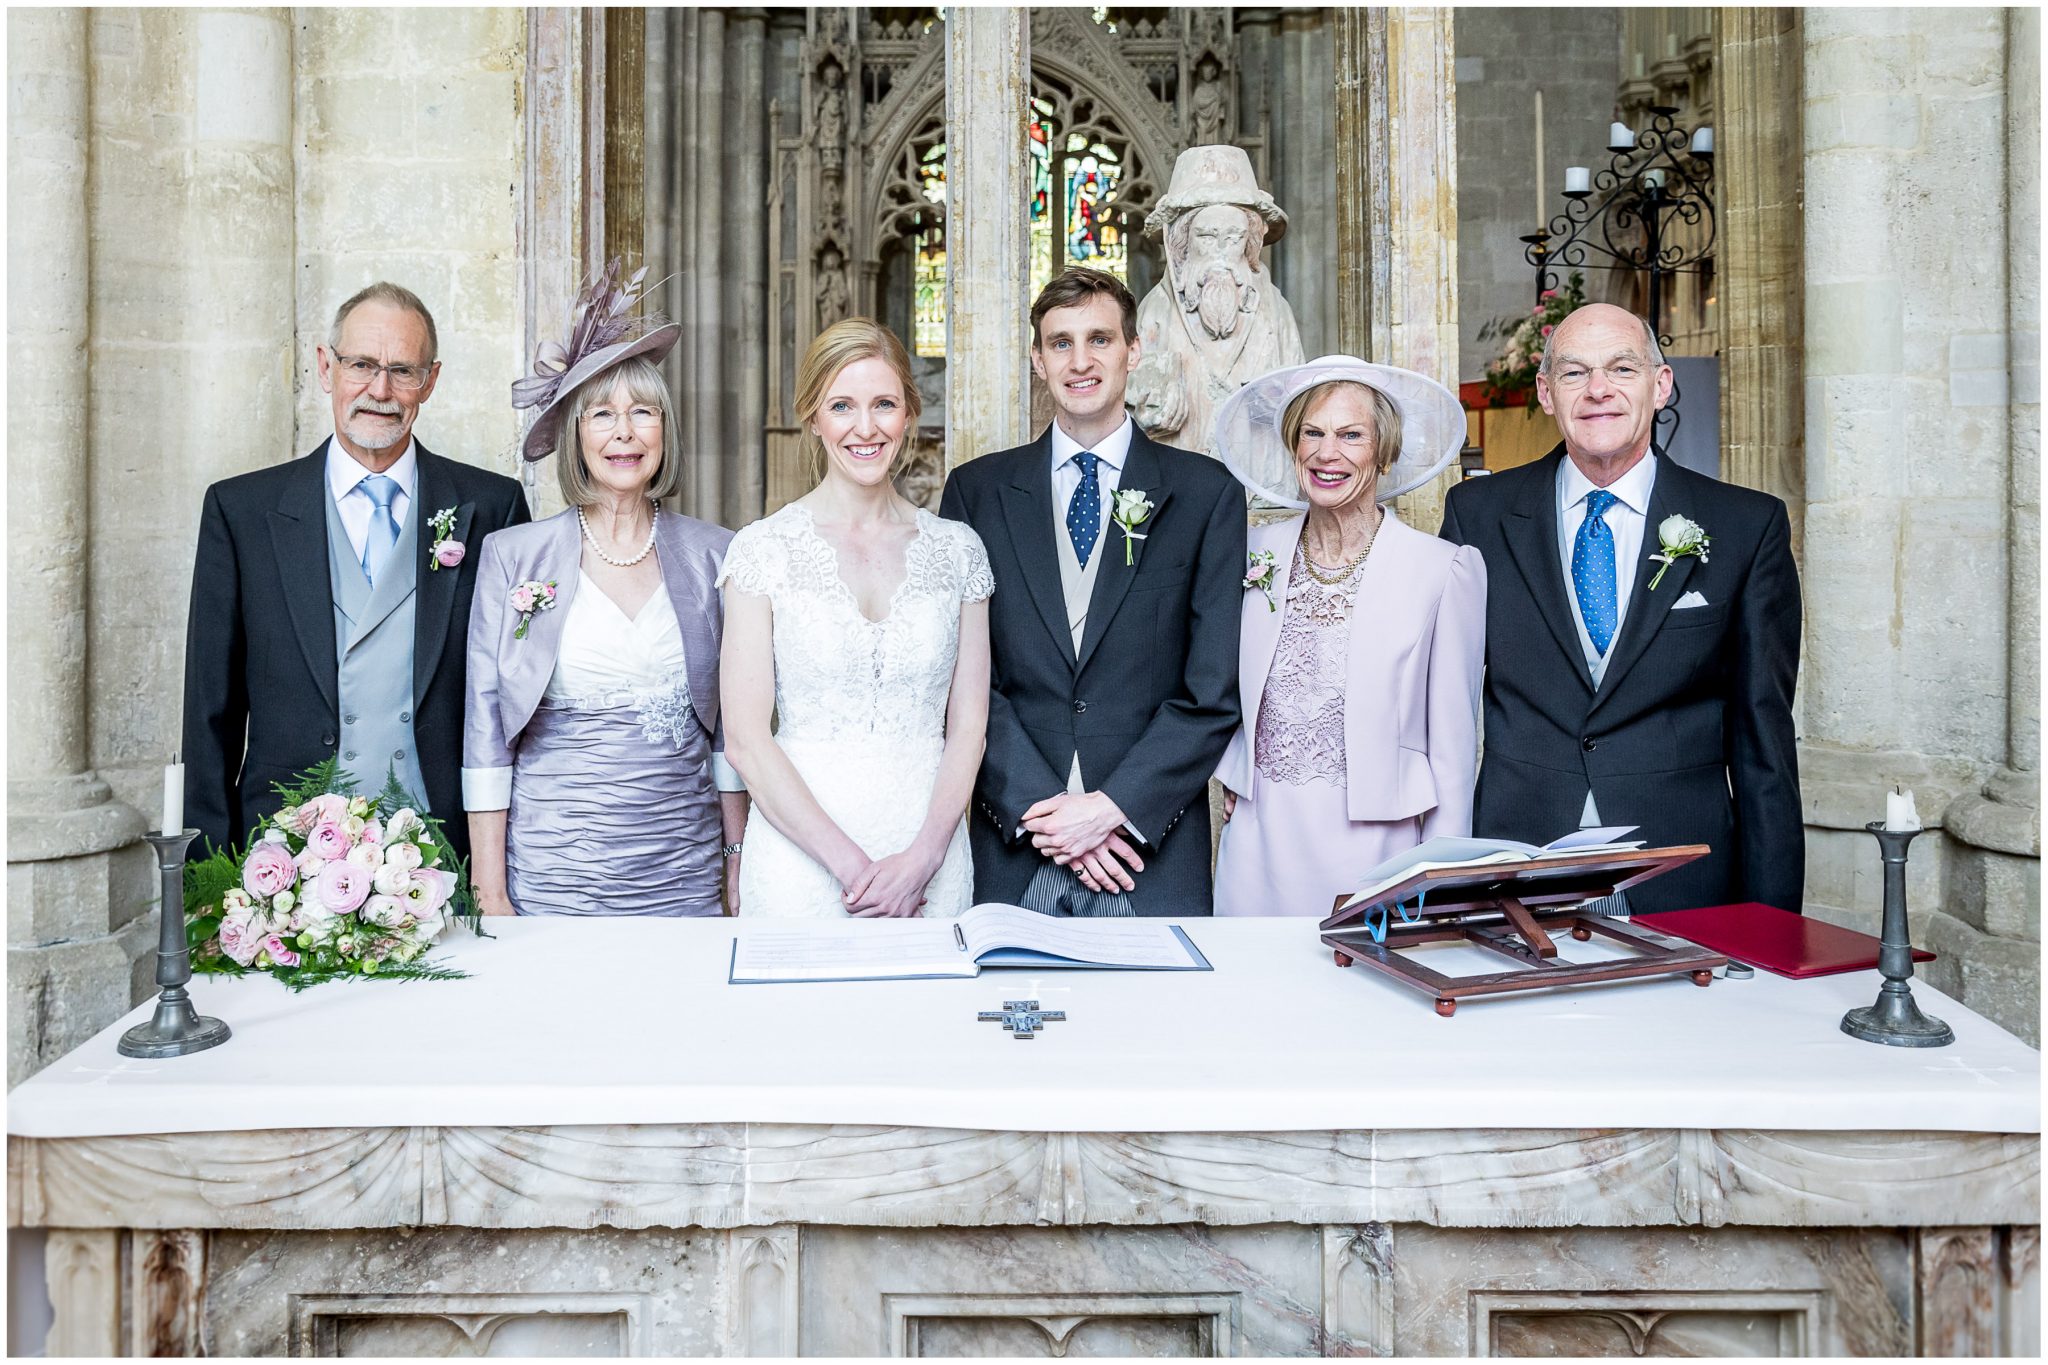 Bride and groom with family at the signing of the marriage register